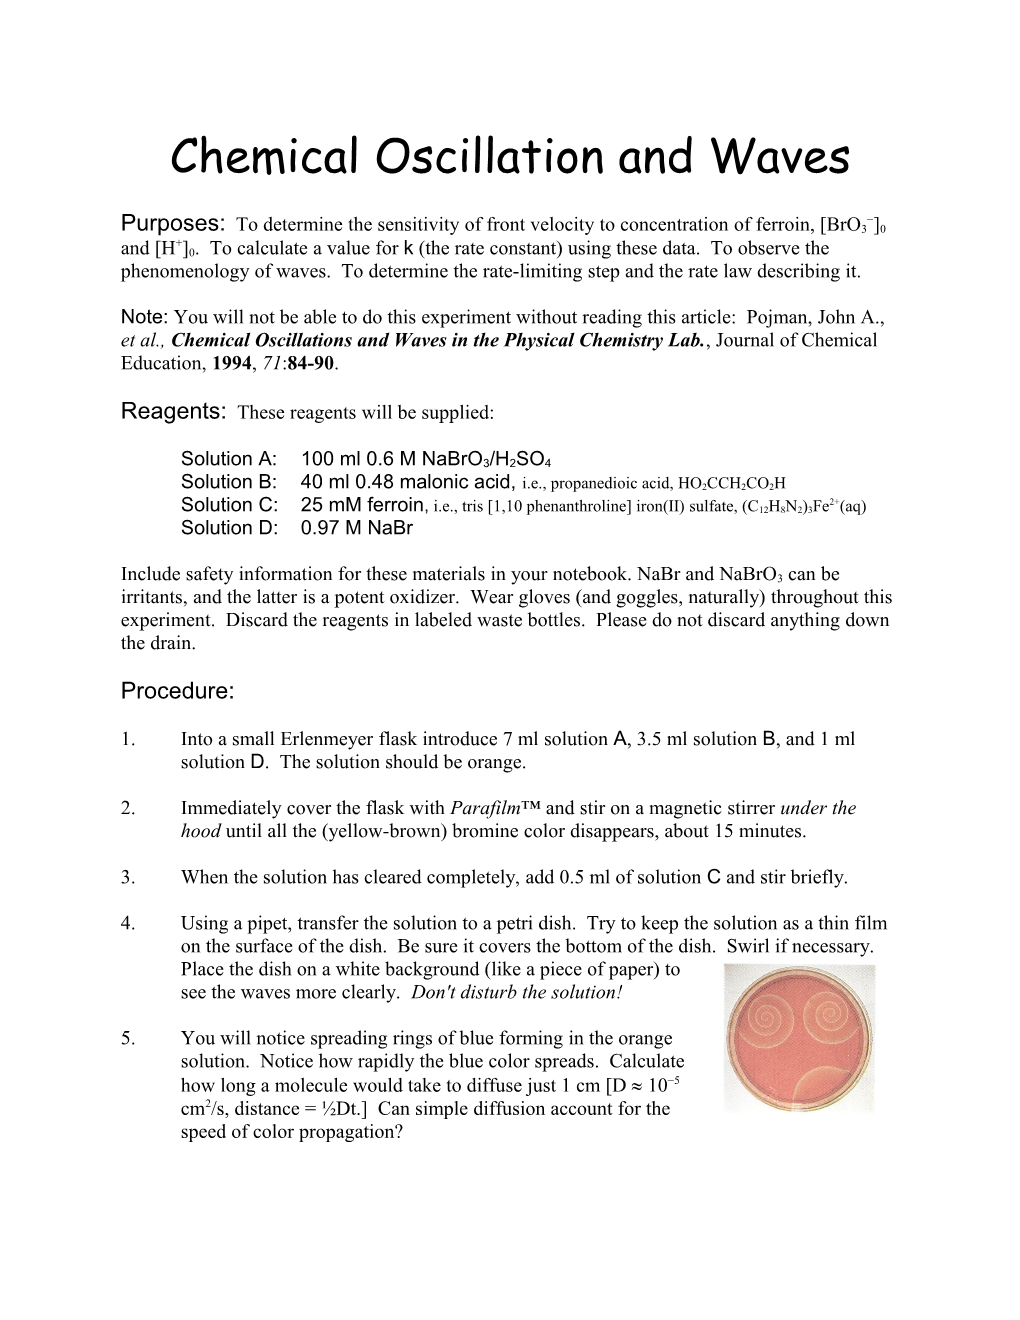 Chemical Oscillation and Waves